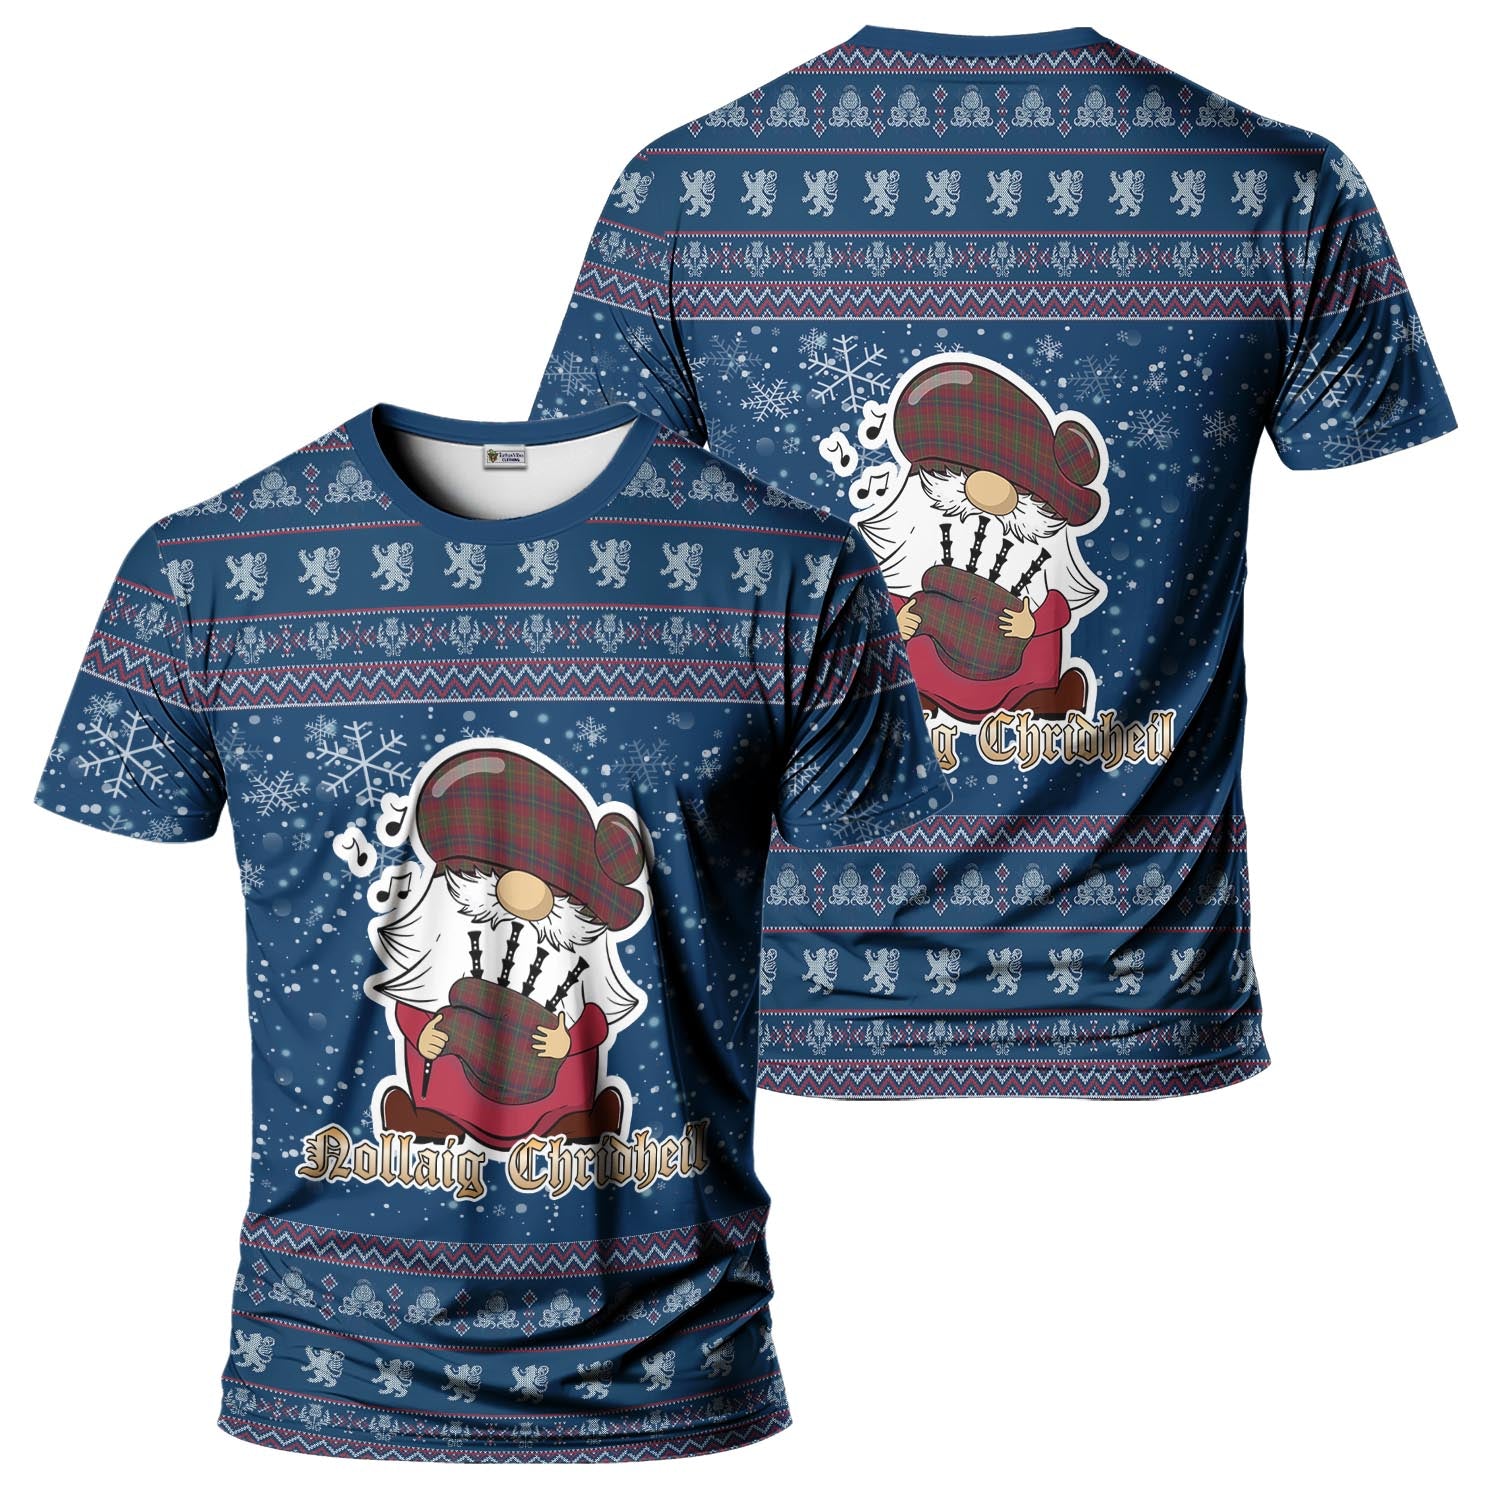 Rice of Wales Clan Christmas Family T-Shirt with Funny Gnome Playing Bagpipes Kid's Shirt Blue - Tartanvibesclothing